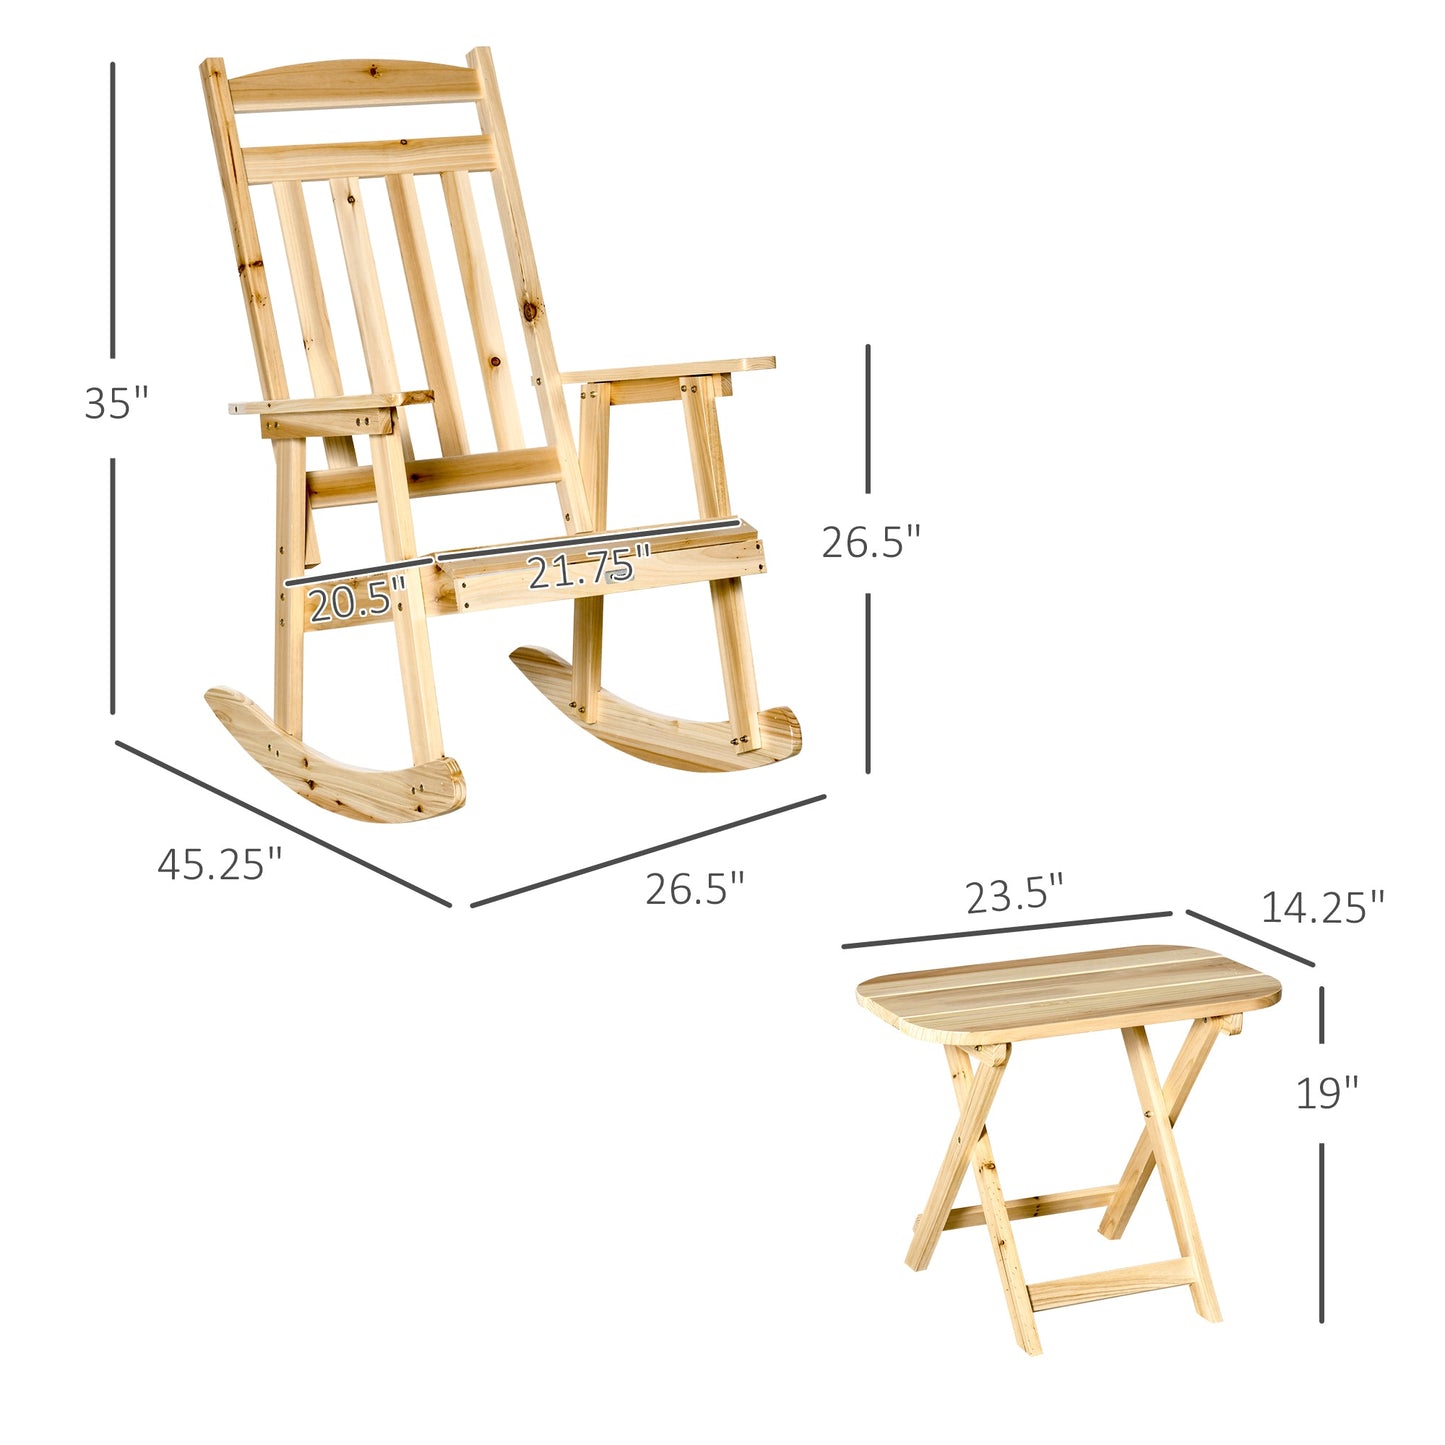 Outdoor and Garden-Wooden Outdoor Rocking Chair, 2-Piece Porch Rocker Set with Foldable Table for Patio, Backyard and Garden, Natural - Outdoor Style Company